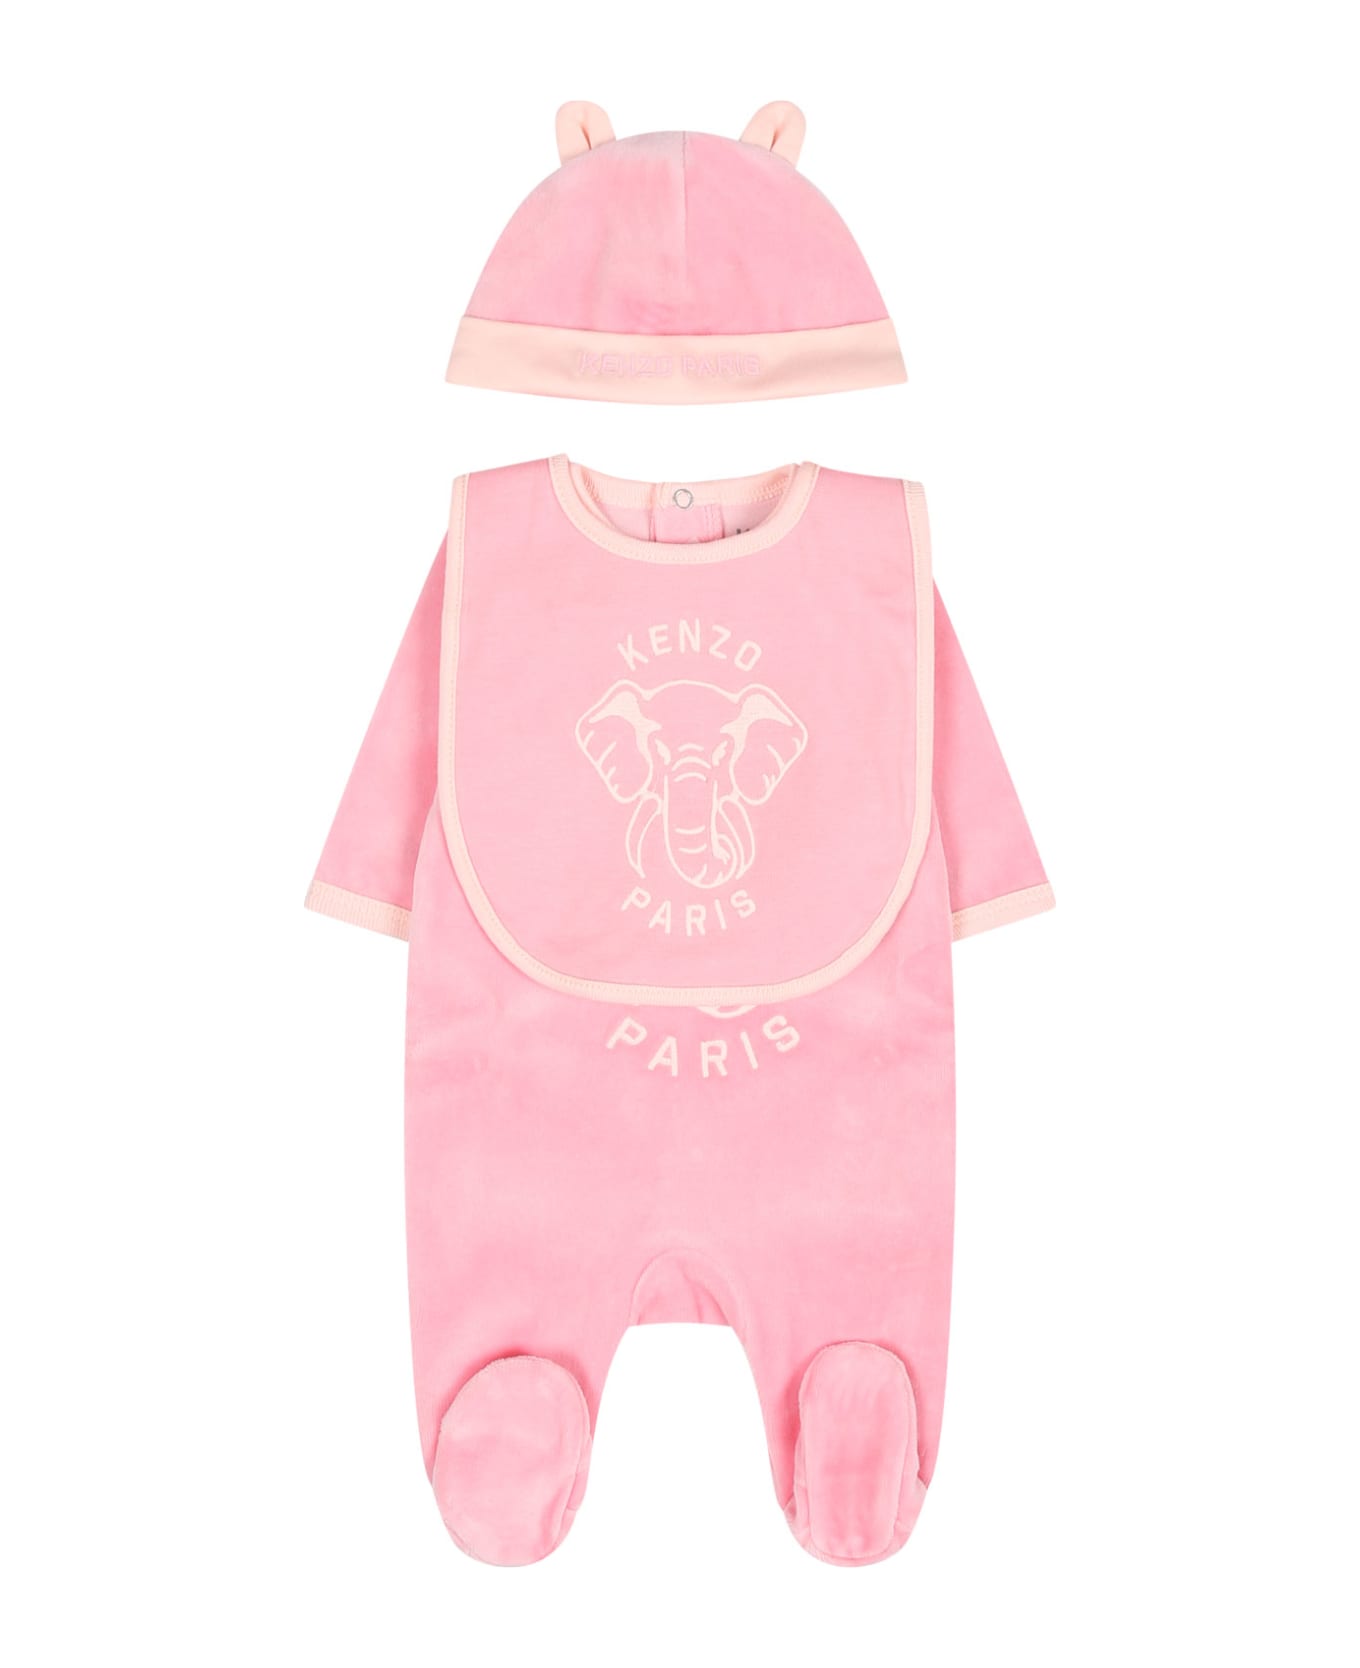 Kenzo Kids Pink Set For Baby Girl With Print And Logo - Pink ボディスーツ＆セットアップ